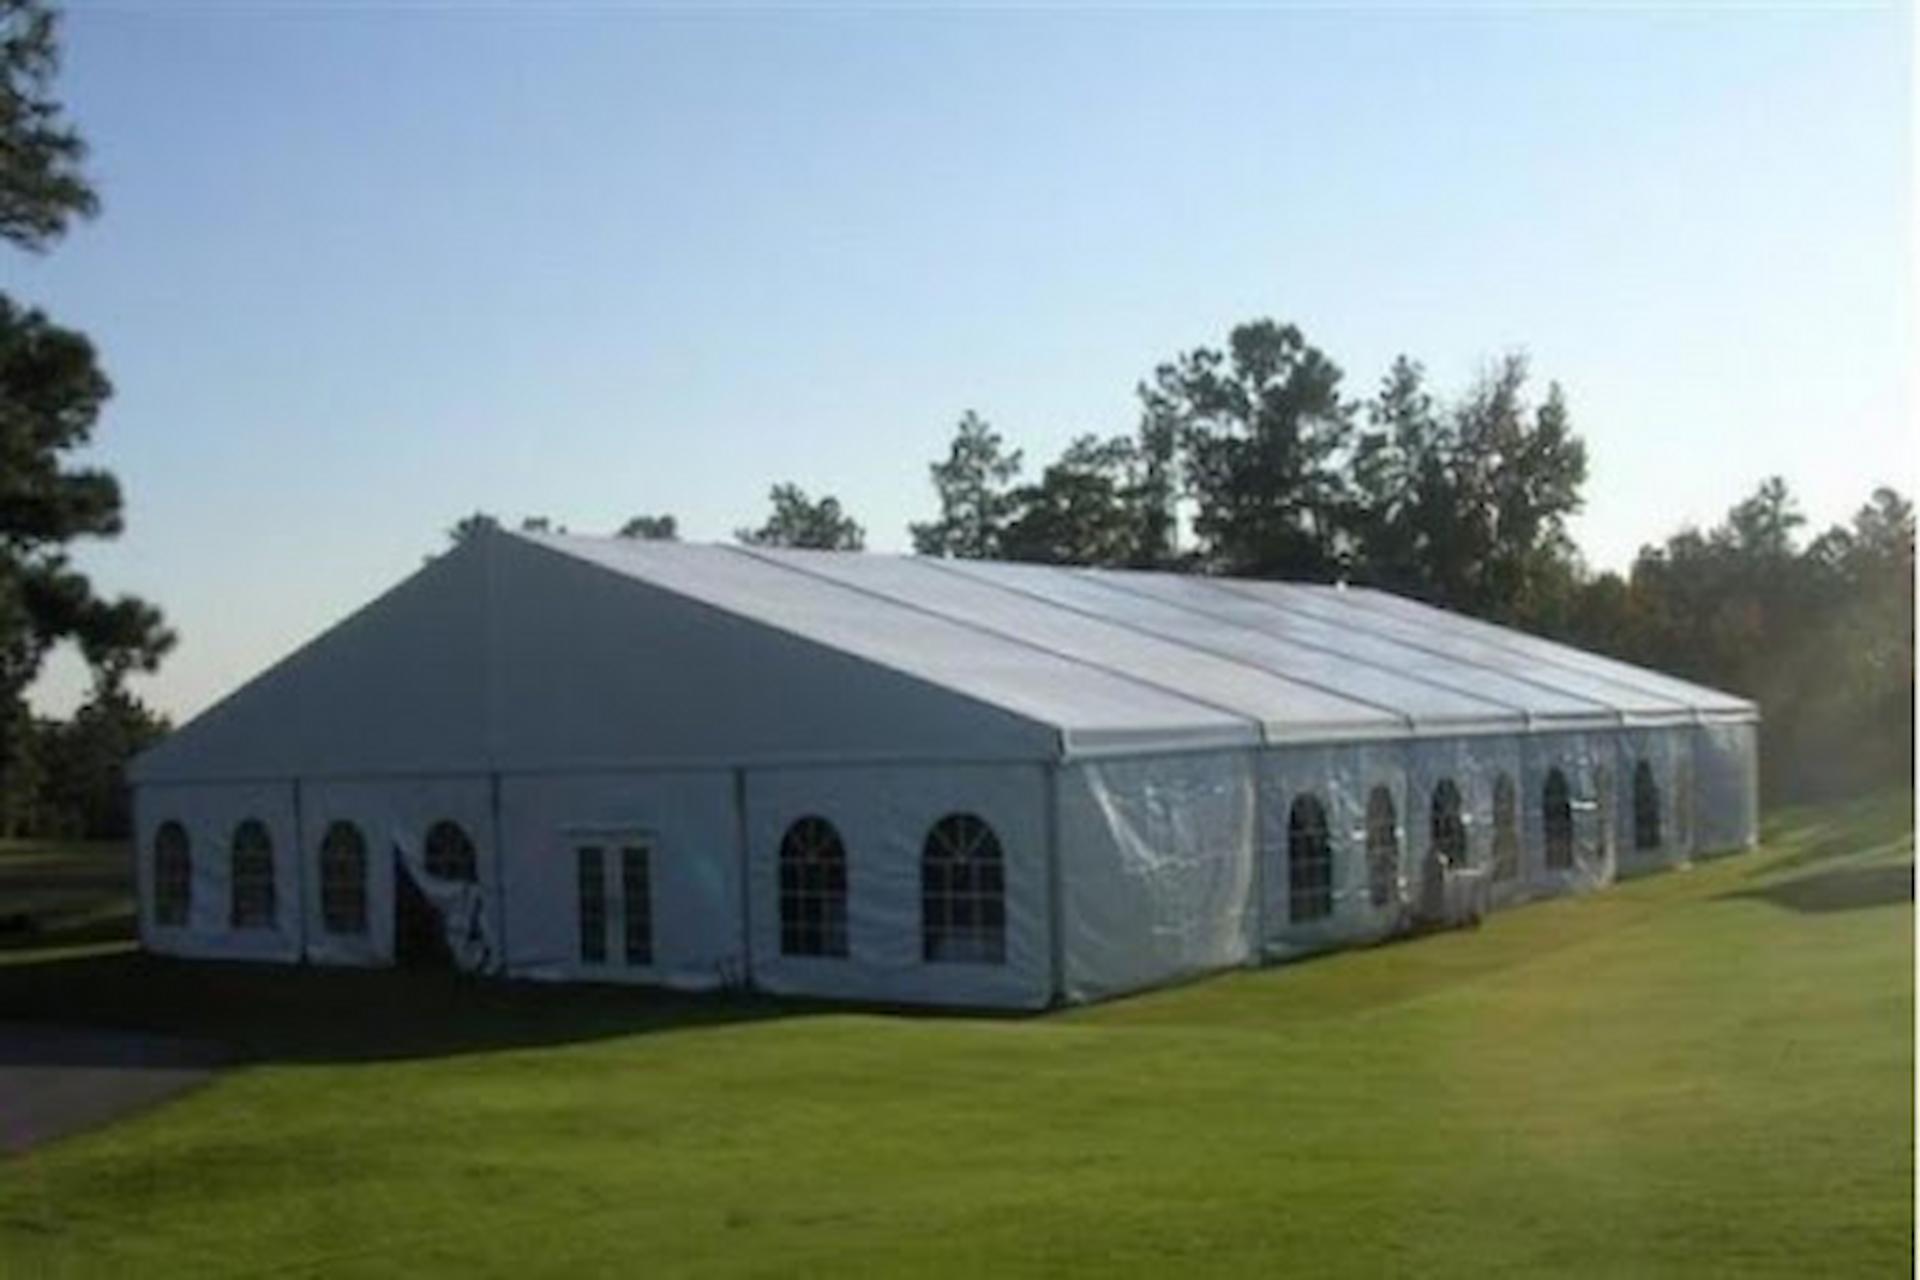 Tent Rentals Company Provides Large Tent For Shade Or Cover